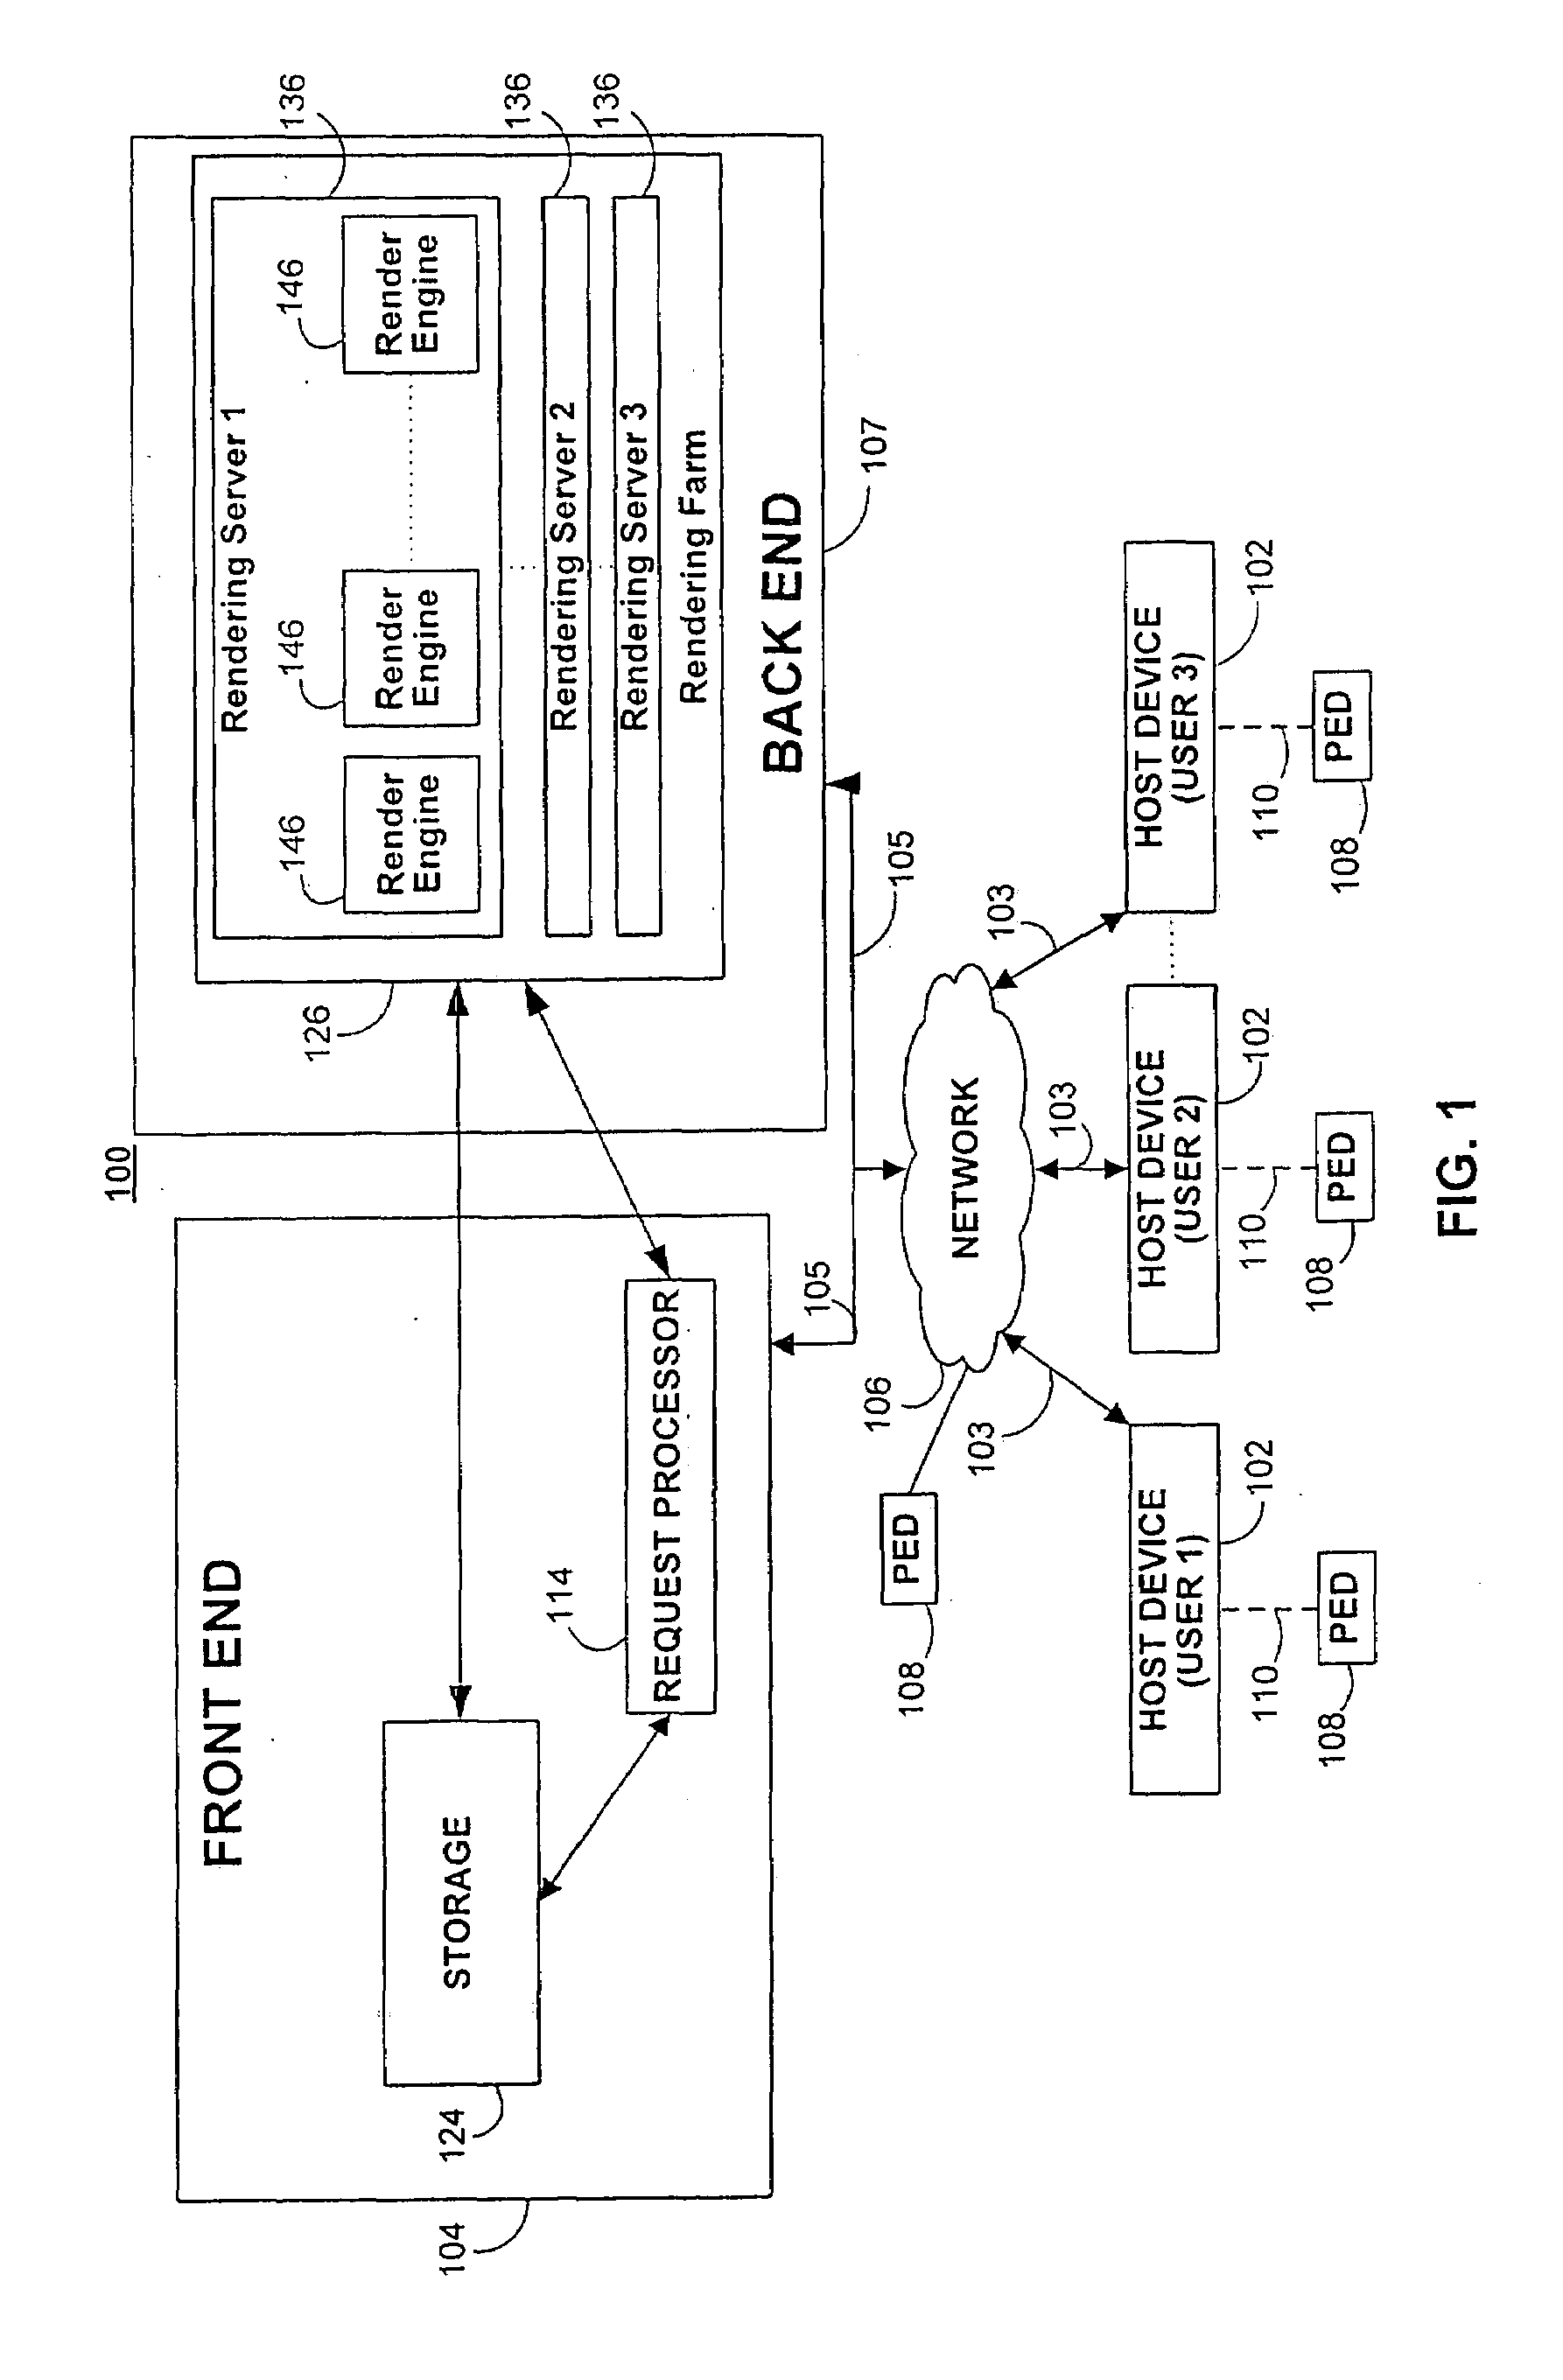 Systems and methods of detecting language and natural language strings for text to speech synthesis